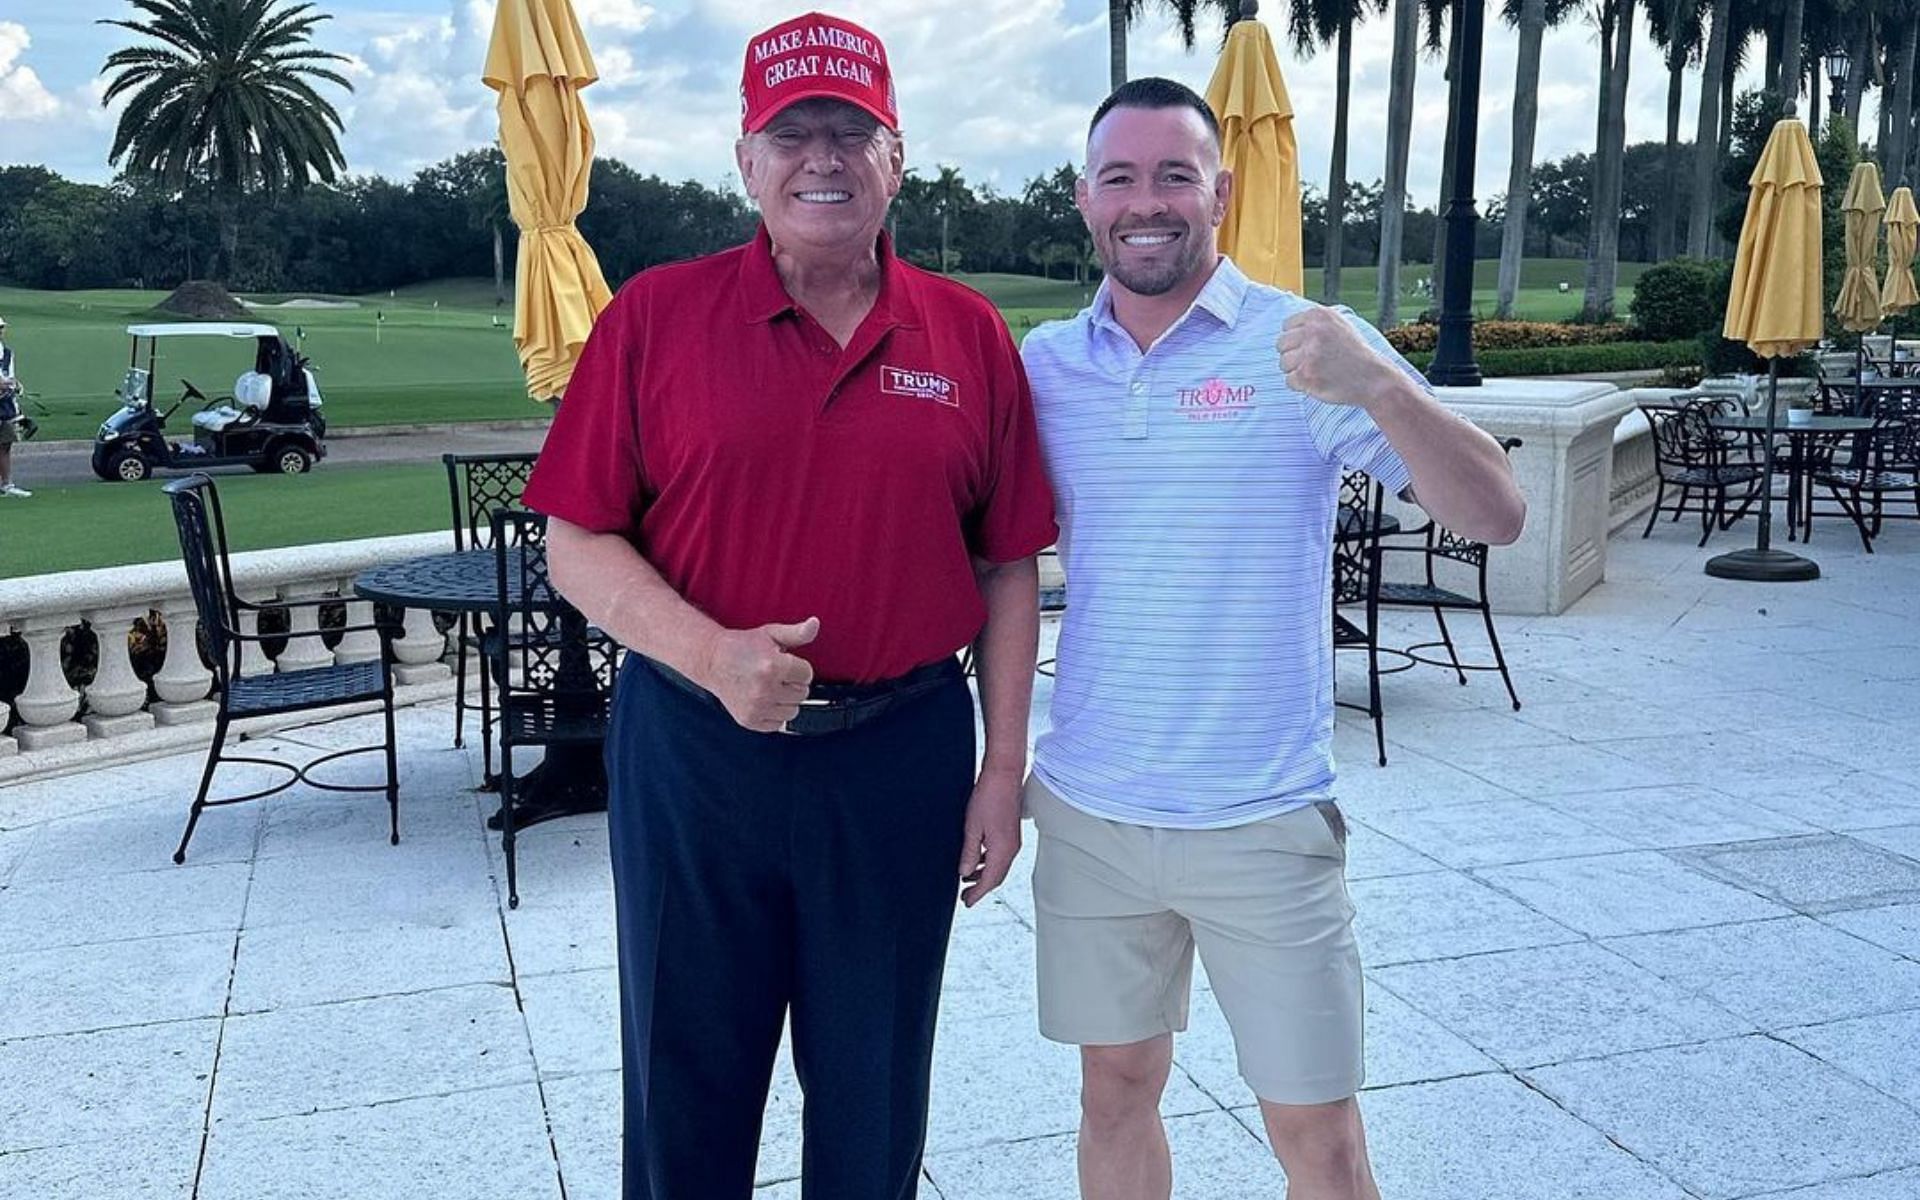 Donald Trump (left) and Colby Covington (right) are known to be steadfast supporters of one another [Image courtesy: @colbycovington on Instagram]